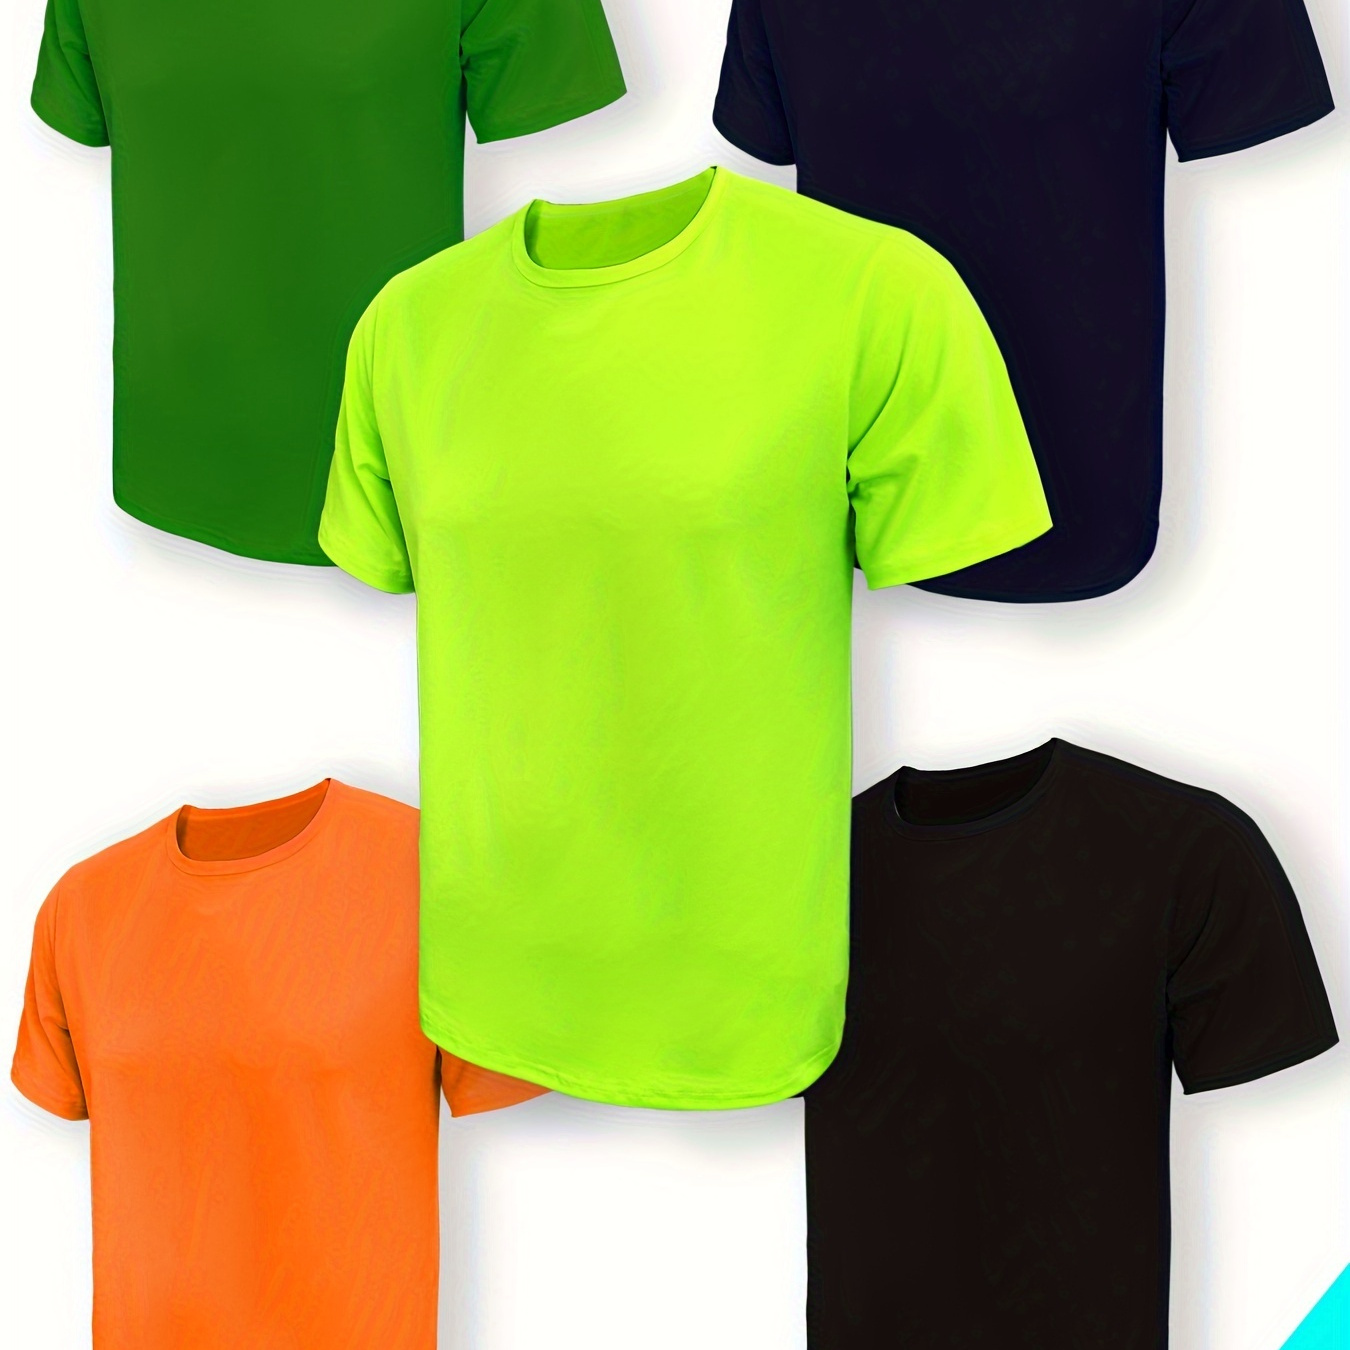 

Men's Solid Color Crew Neck And Short Sleeve T-shirt, Quick Dry And Casual Tops For Summer Sports And Outdoors Wear